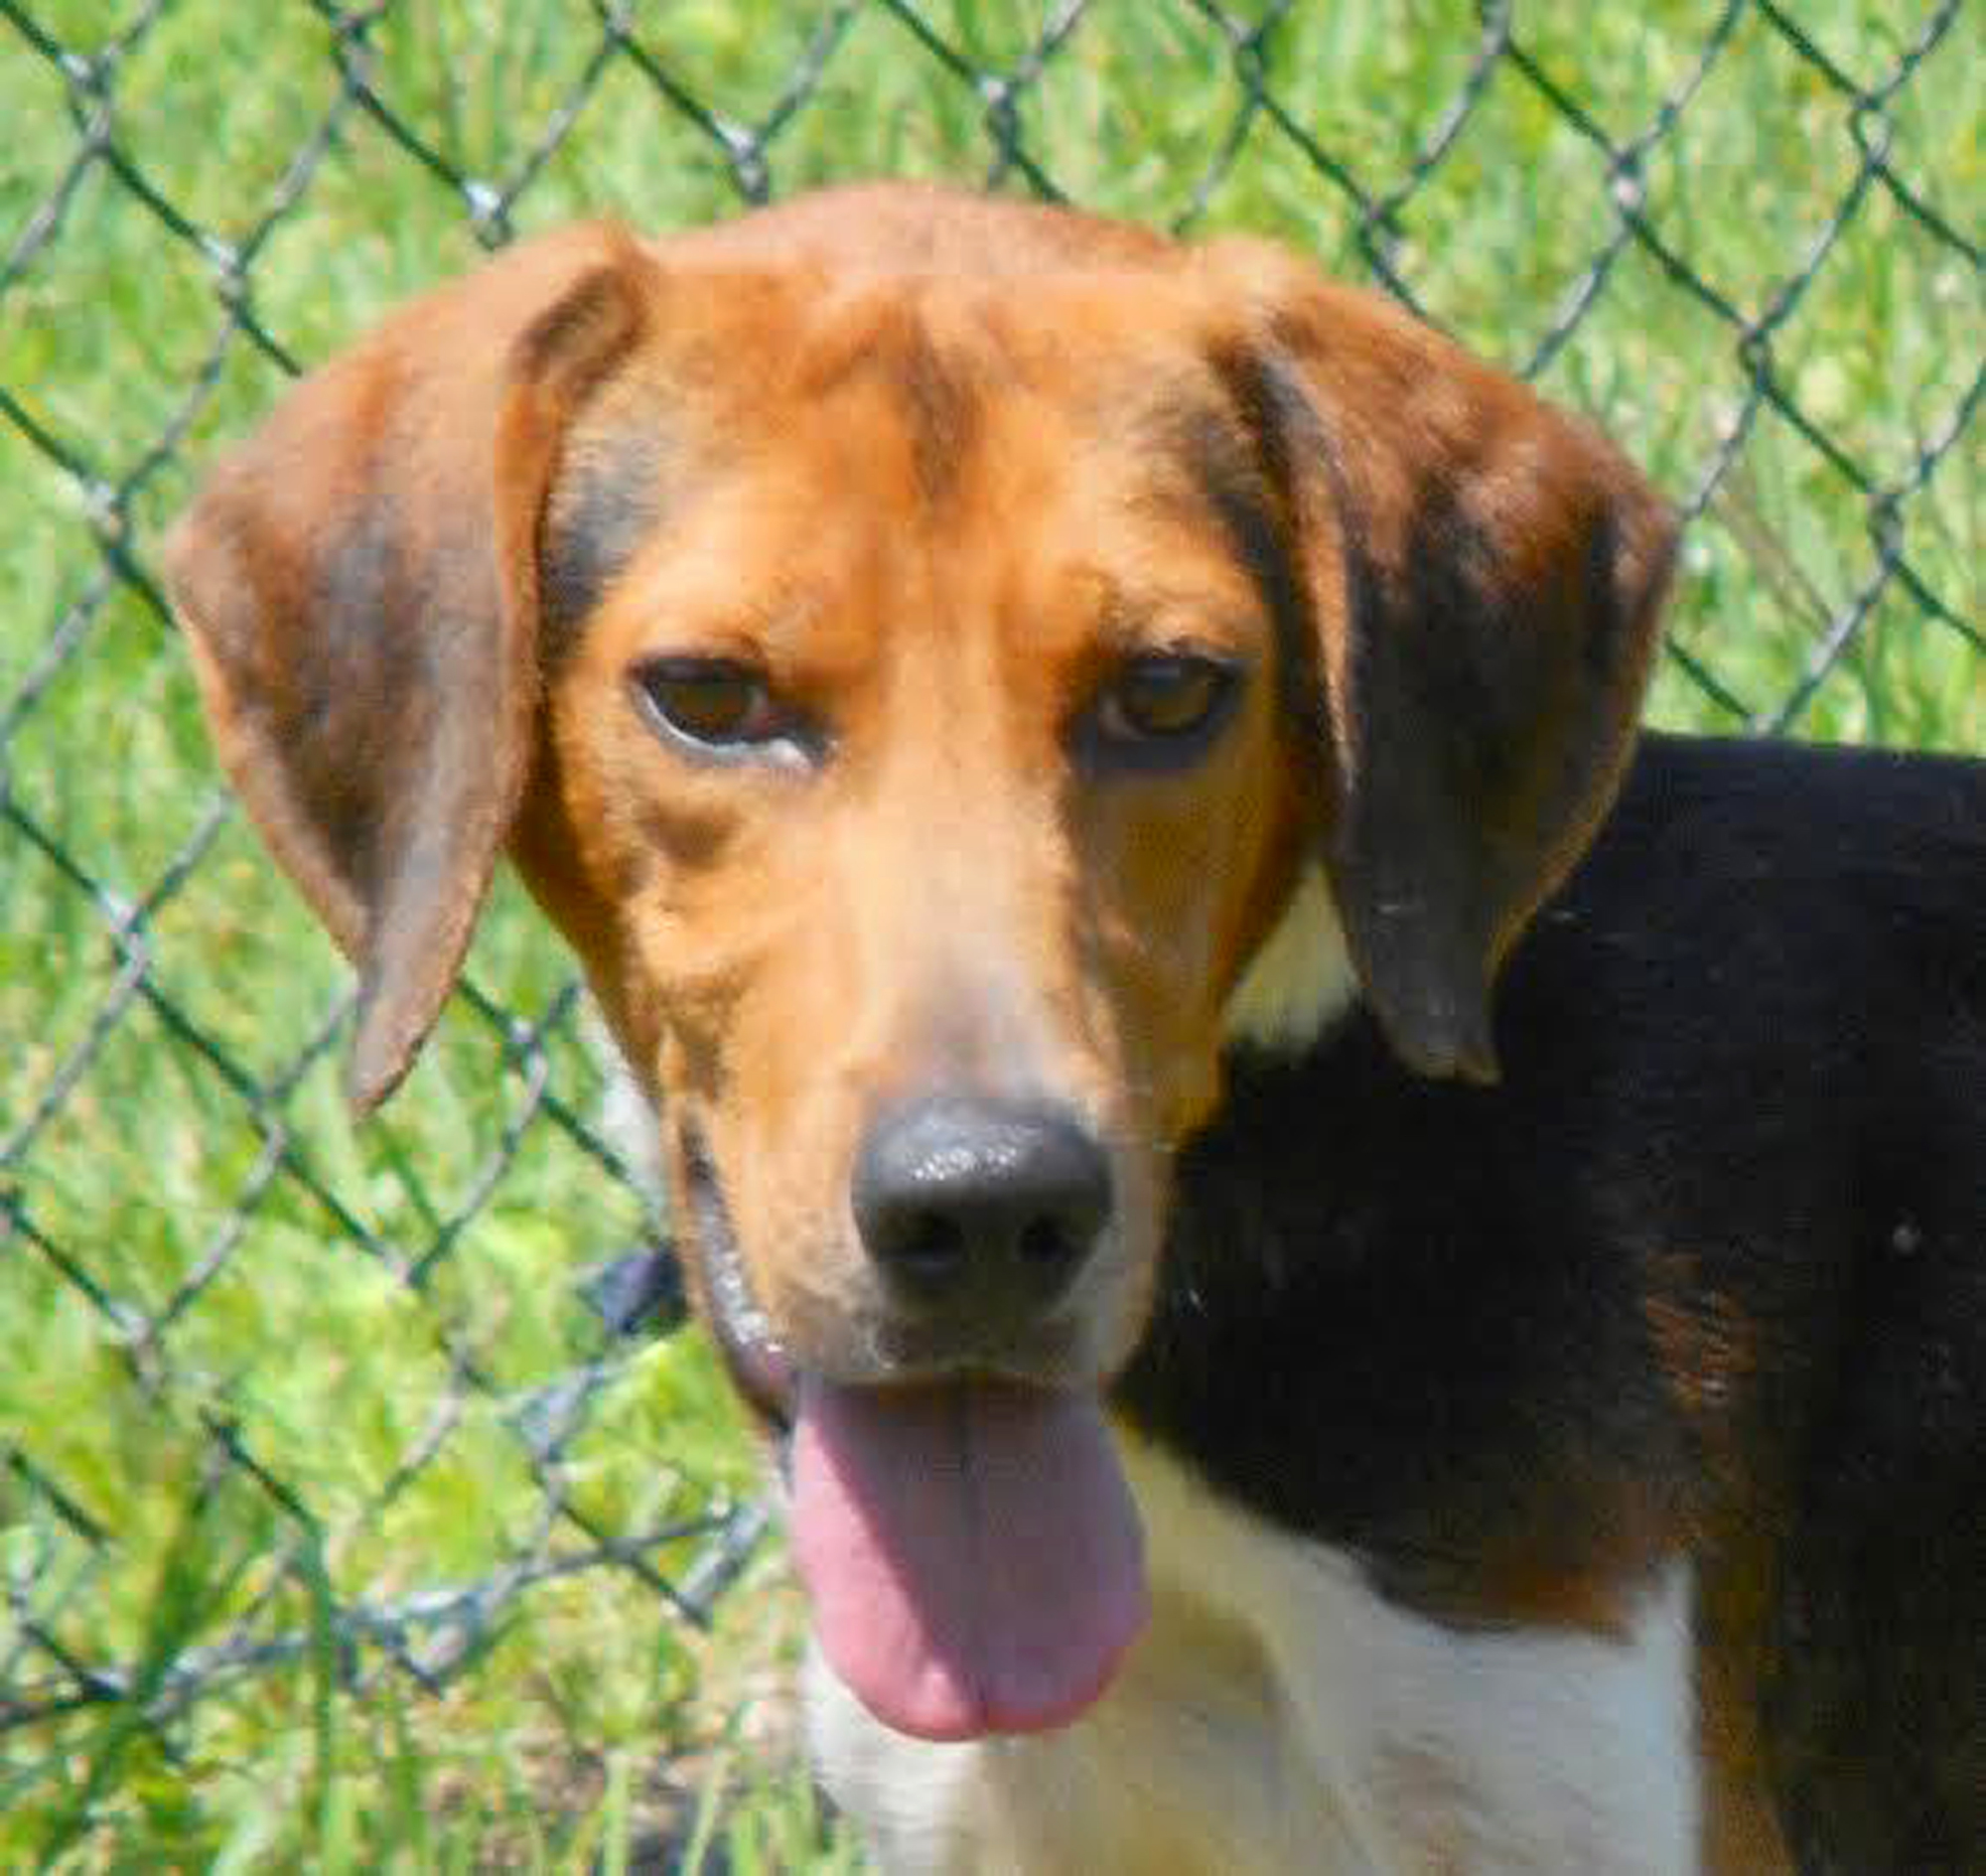 Buck, 31793449, is a male, 4-year-old, hound mix, available at Flagler Humane Society. Courtesy photo